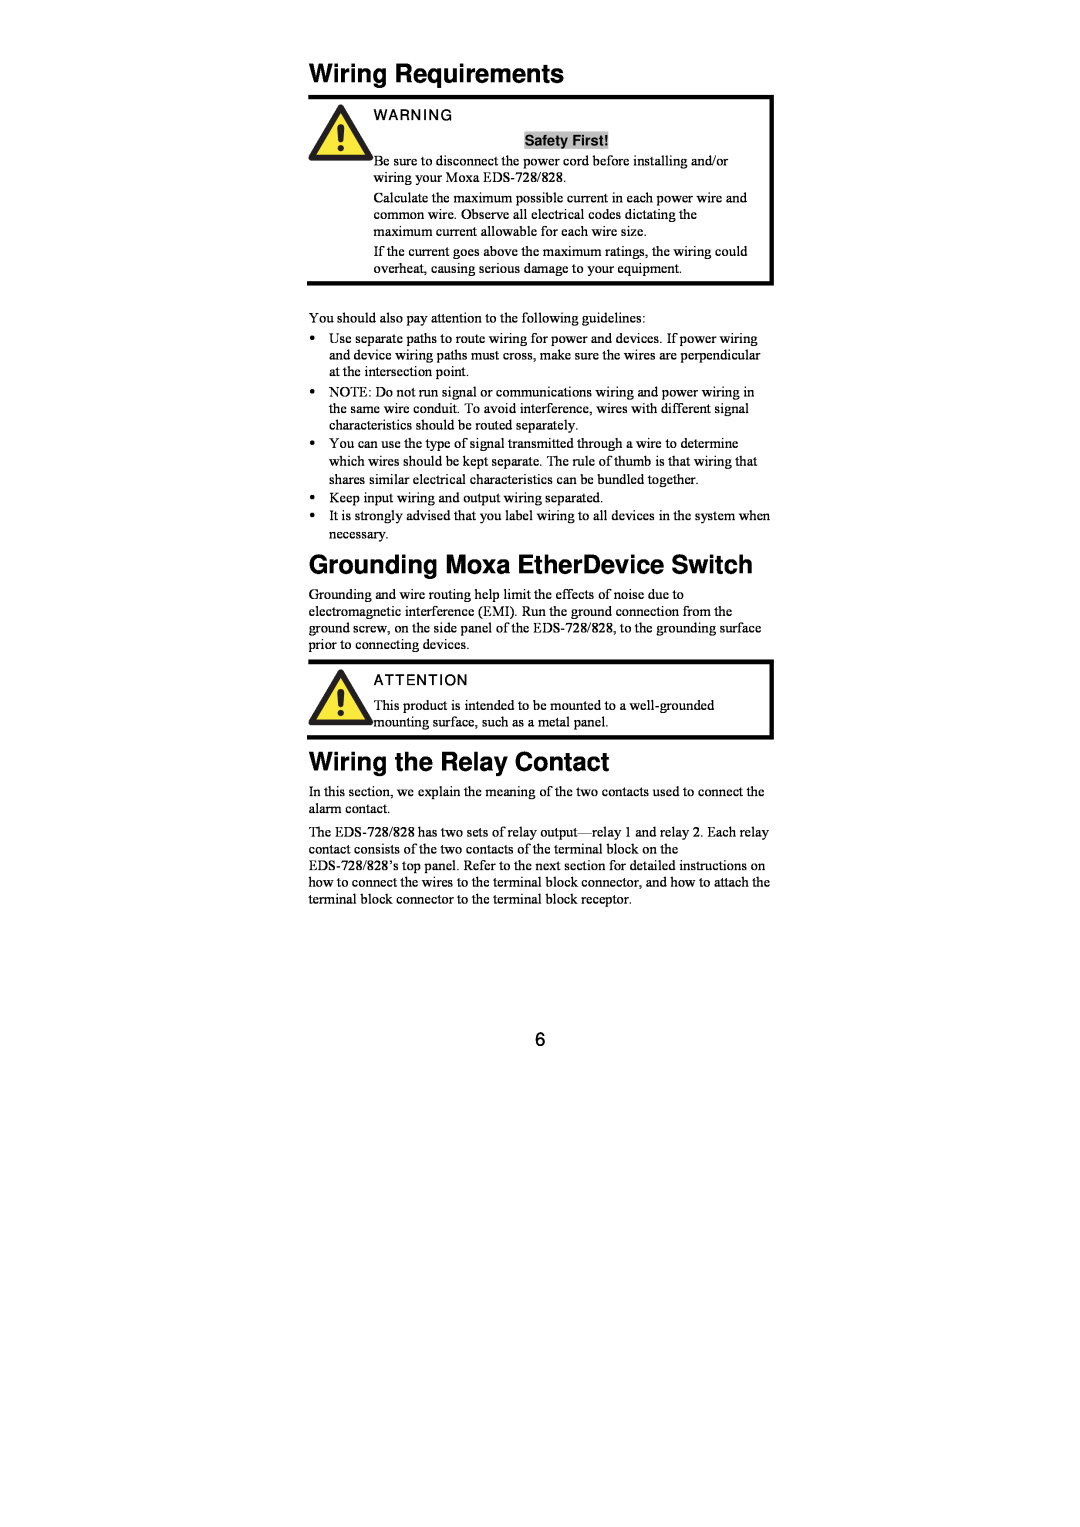 Moxa Technologies EDS-828 Wiring Requirements, Grounding Moxa EtherDevice Switch, Wiring the Relay Contact, Safety First 